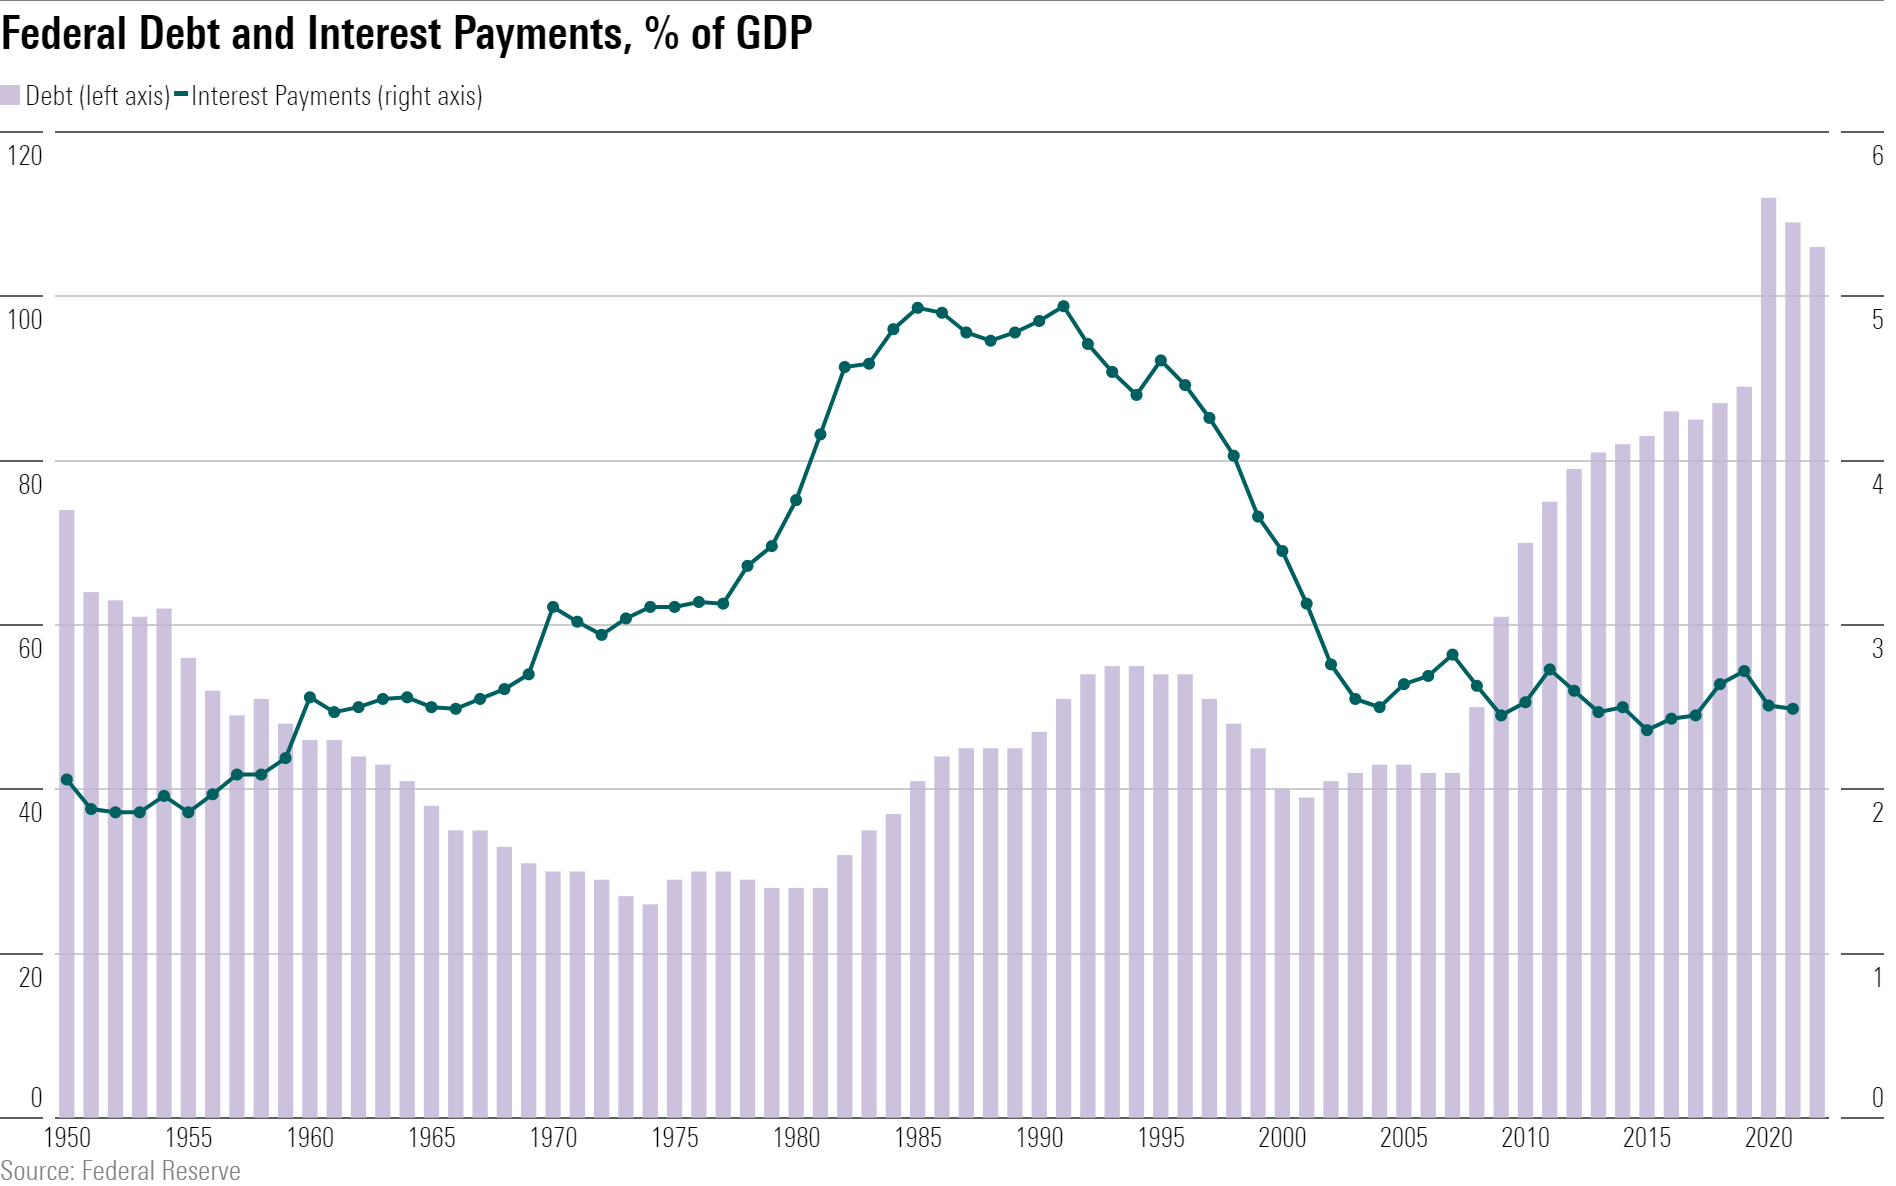 Chart showing federal debt and interest payments as share of GDP